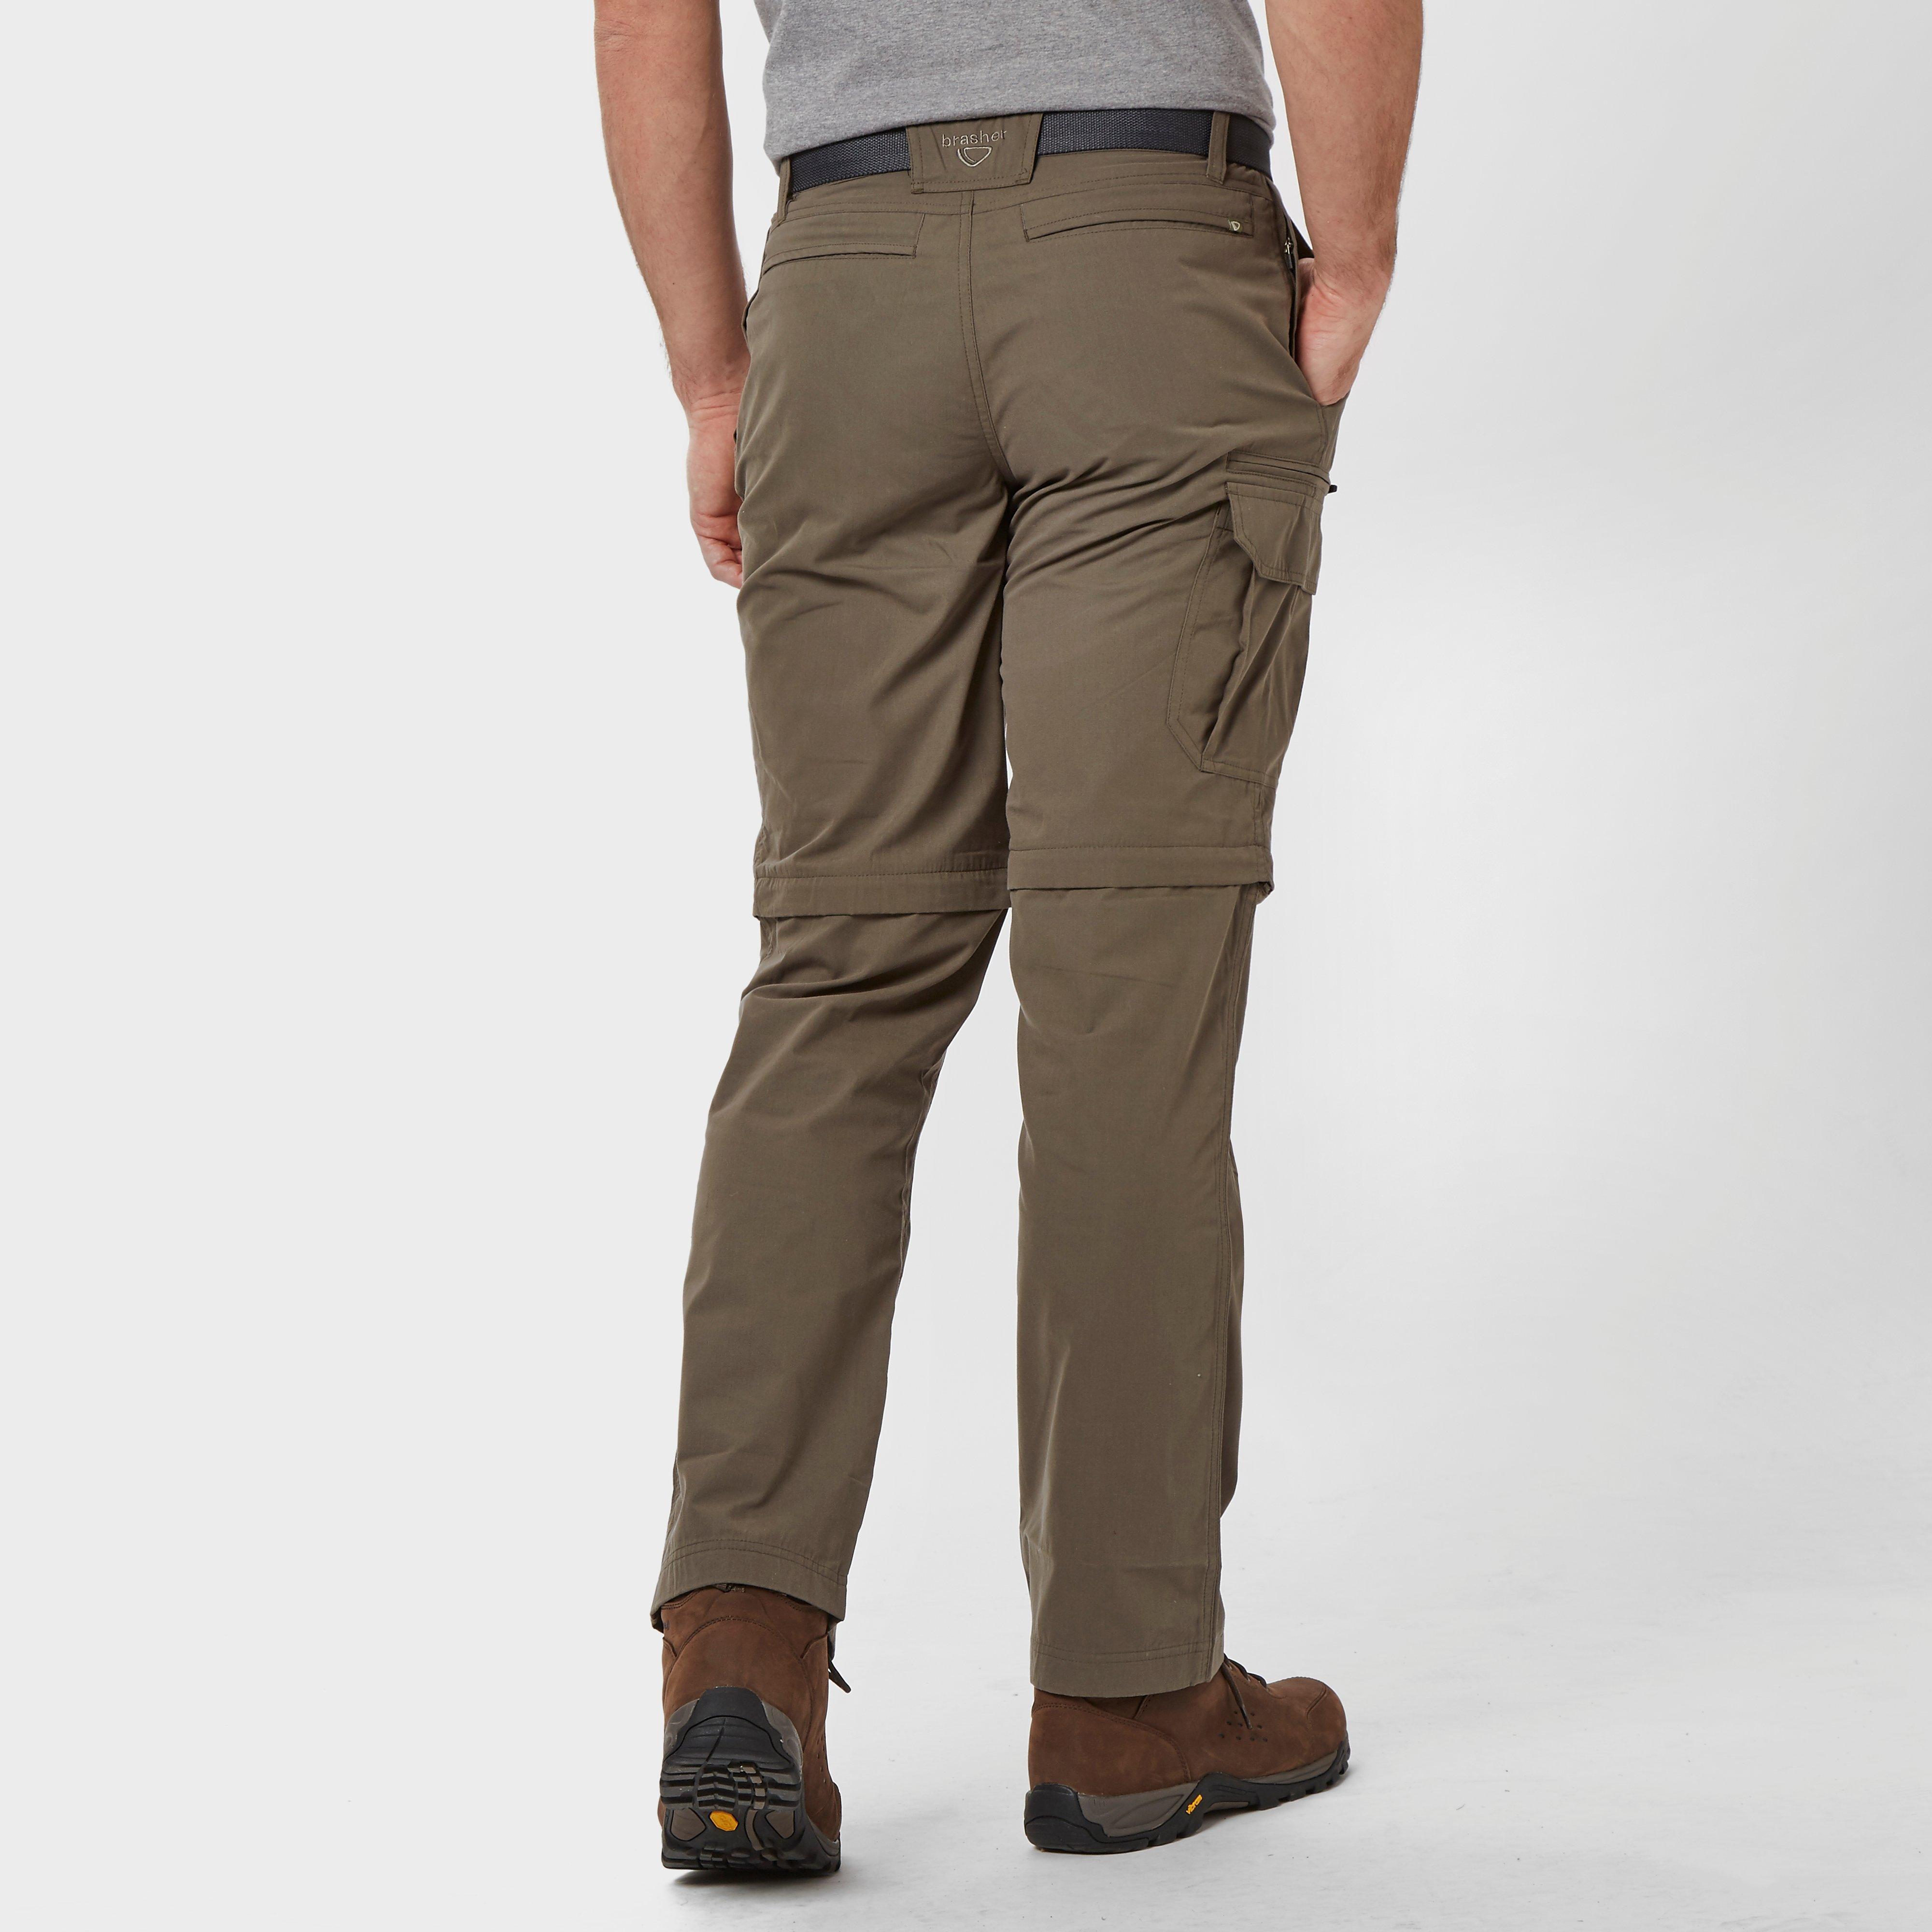 Brasher Men's Convertible Trousers Review